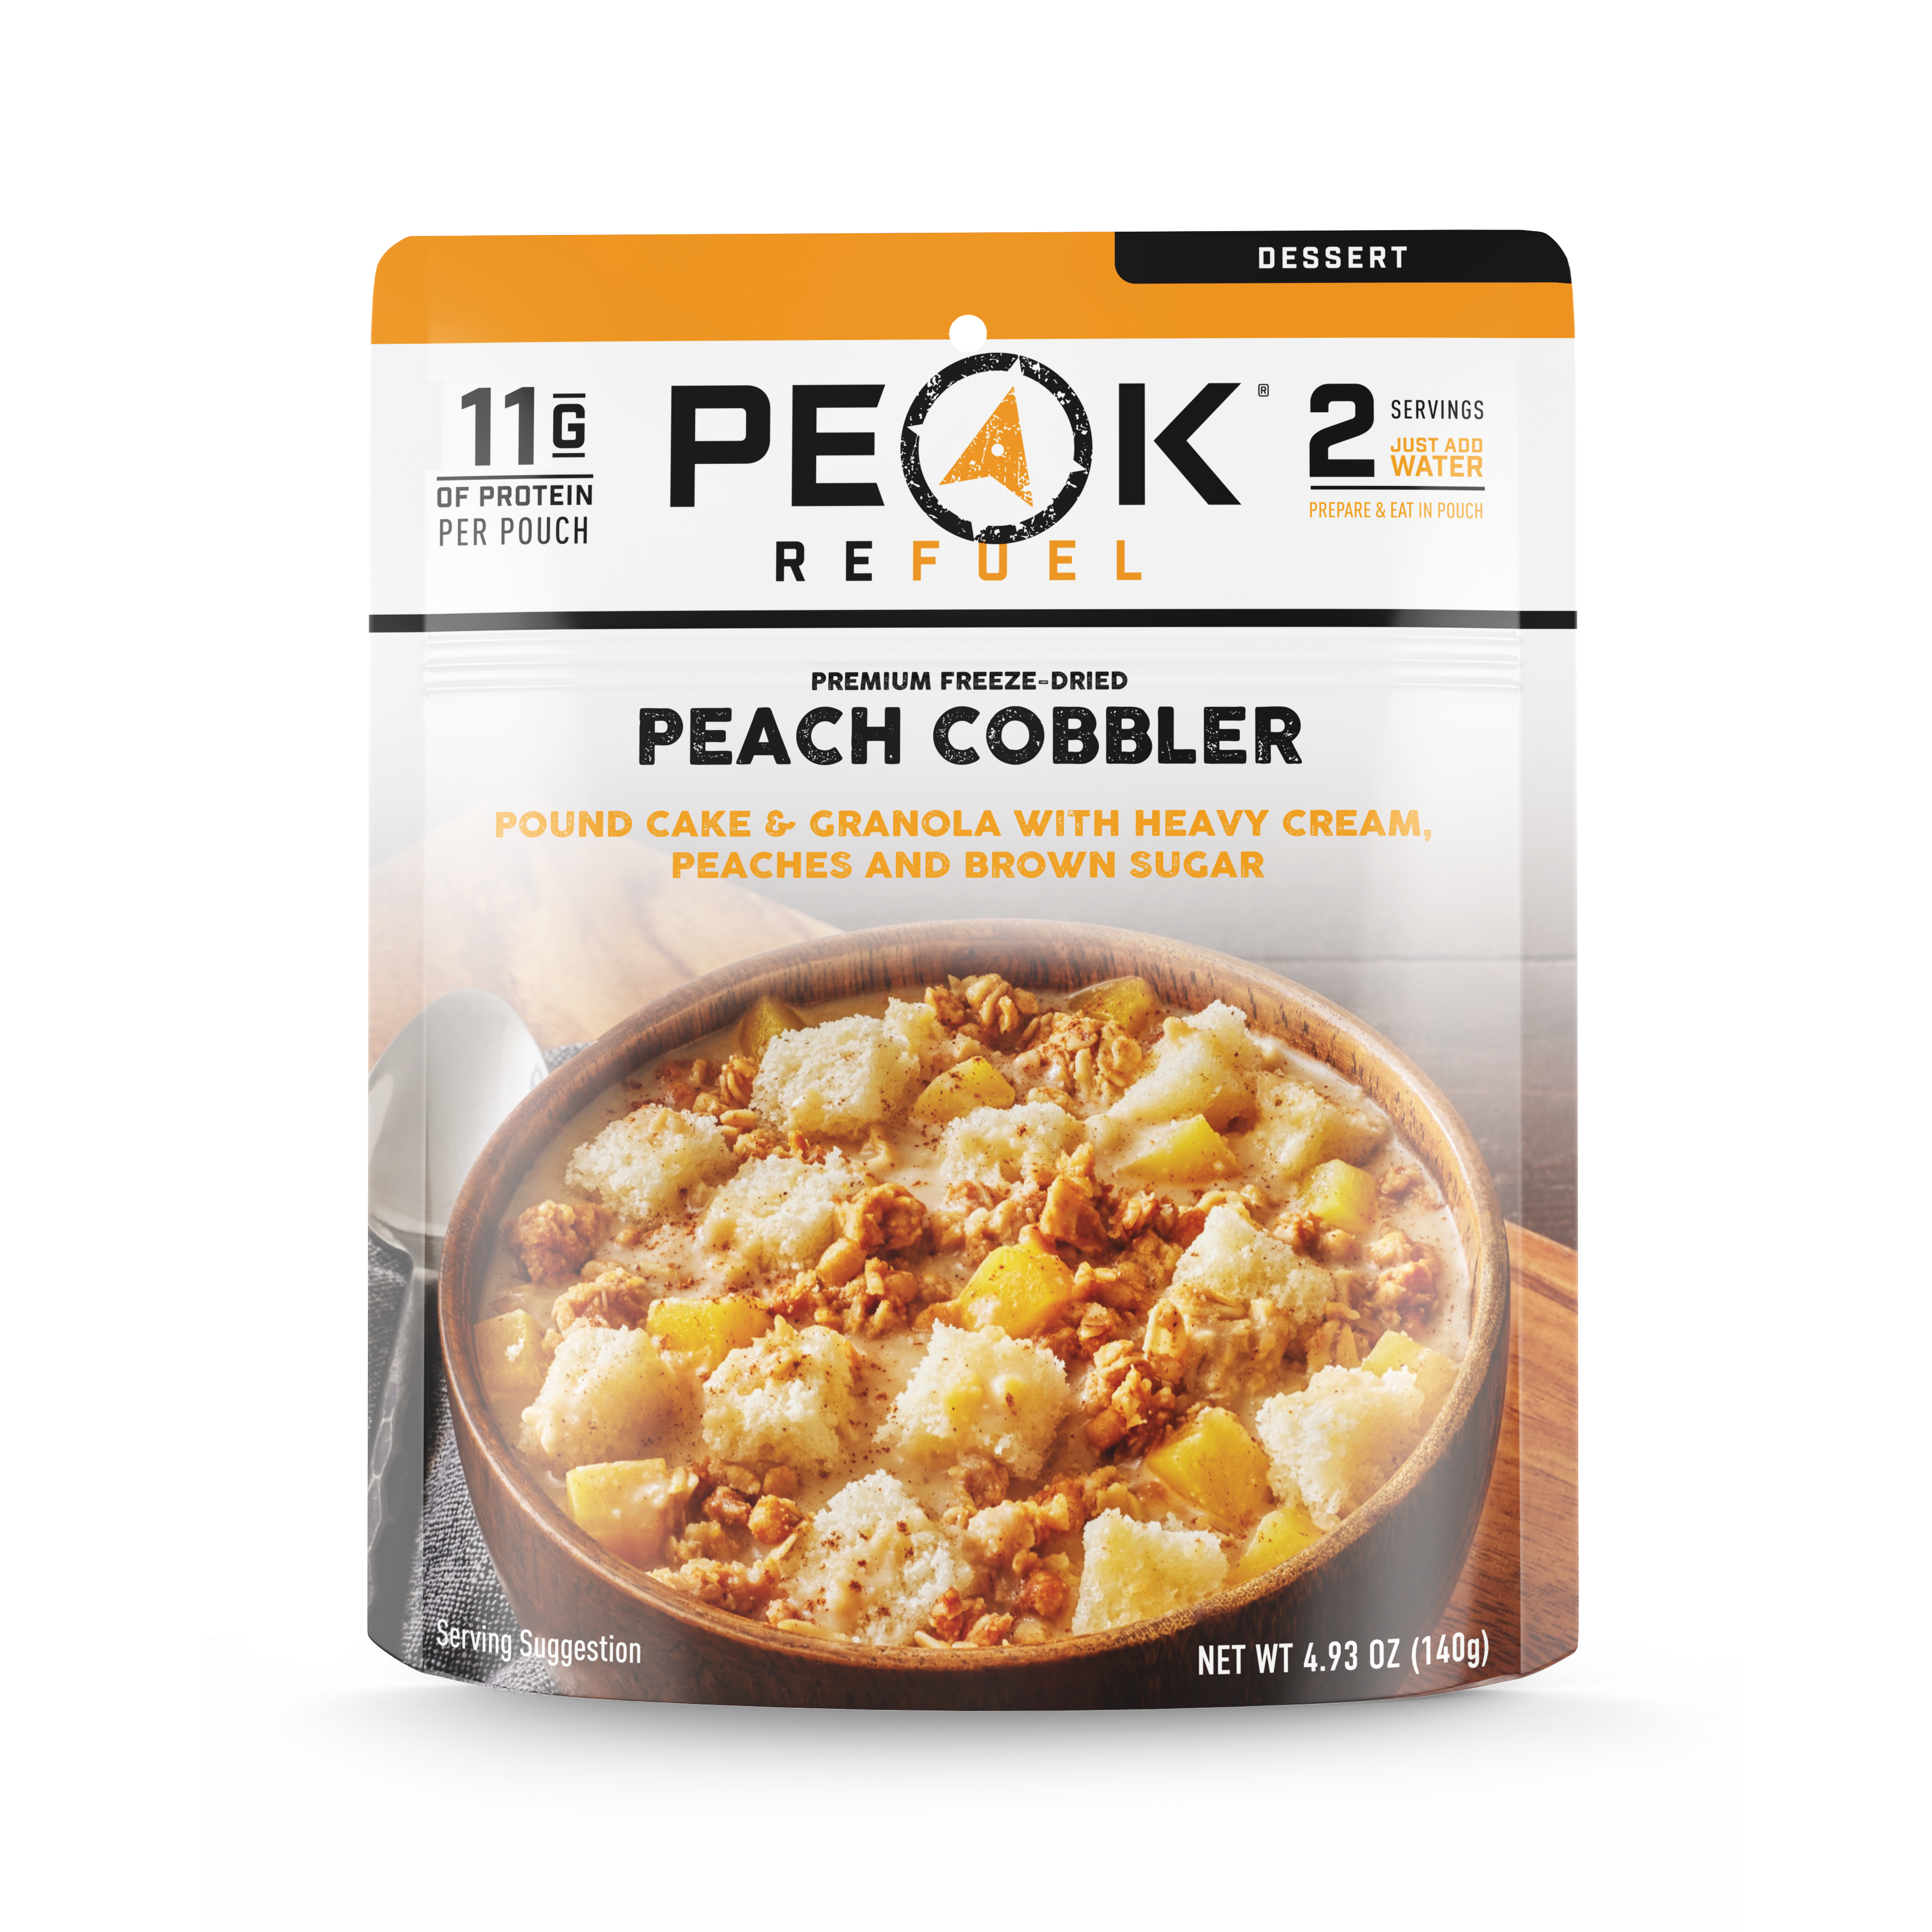 Peach Cobbler dessert in a package, ready to be enjoyed on the trail. Just add boiling water, stir, and wait 10 minutes. 670 calories per pouch.